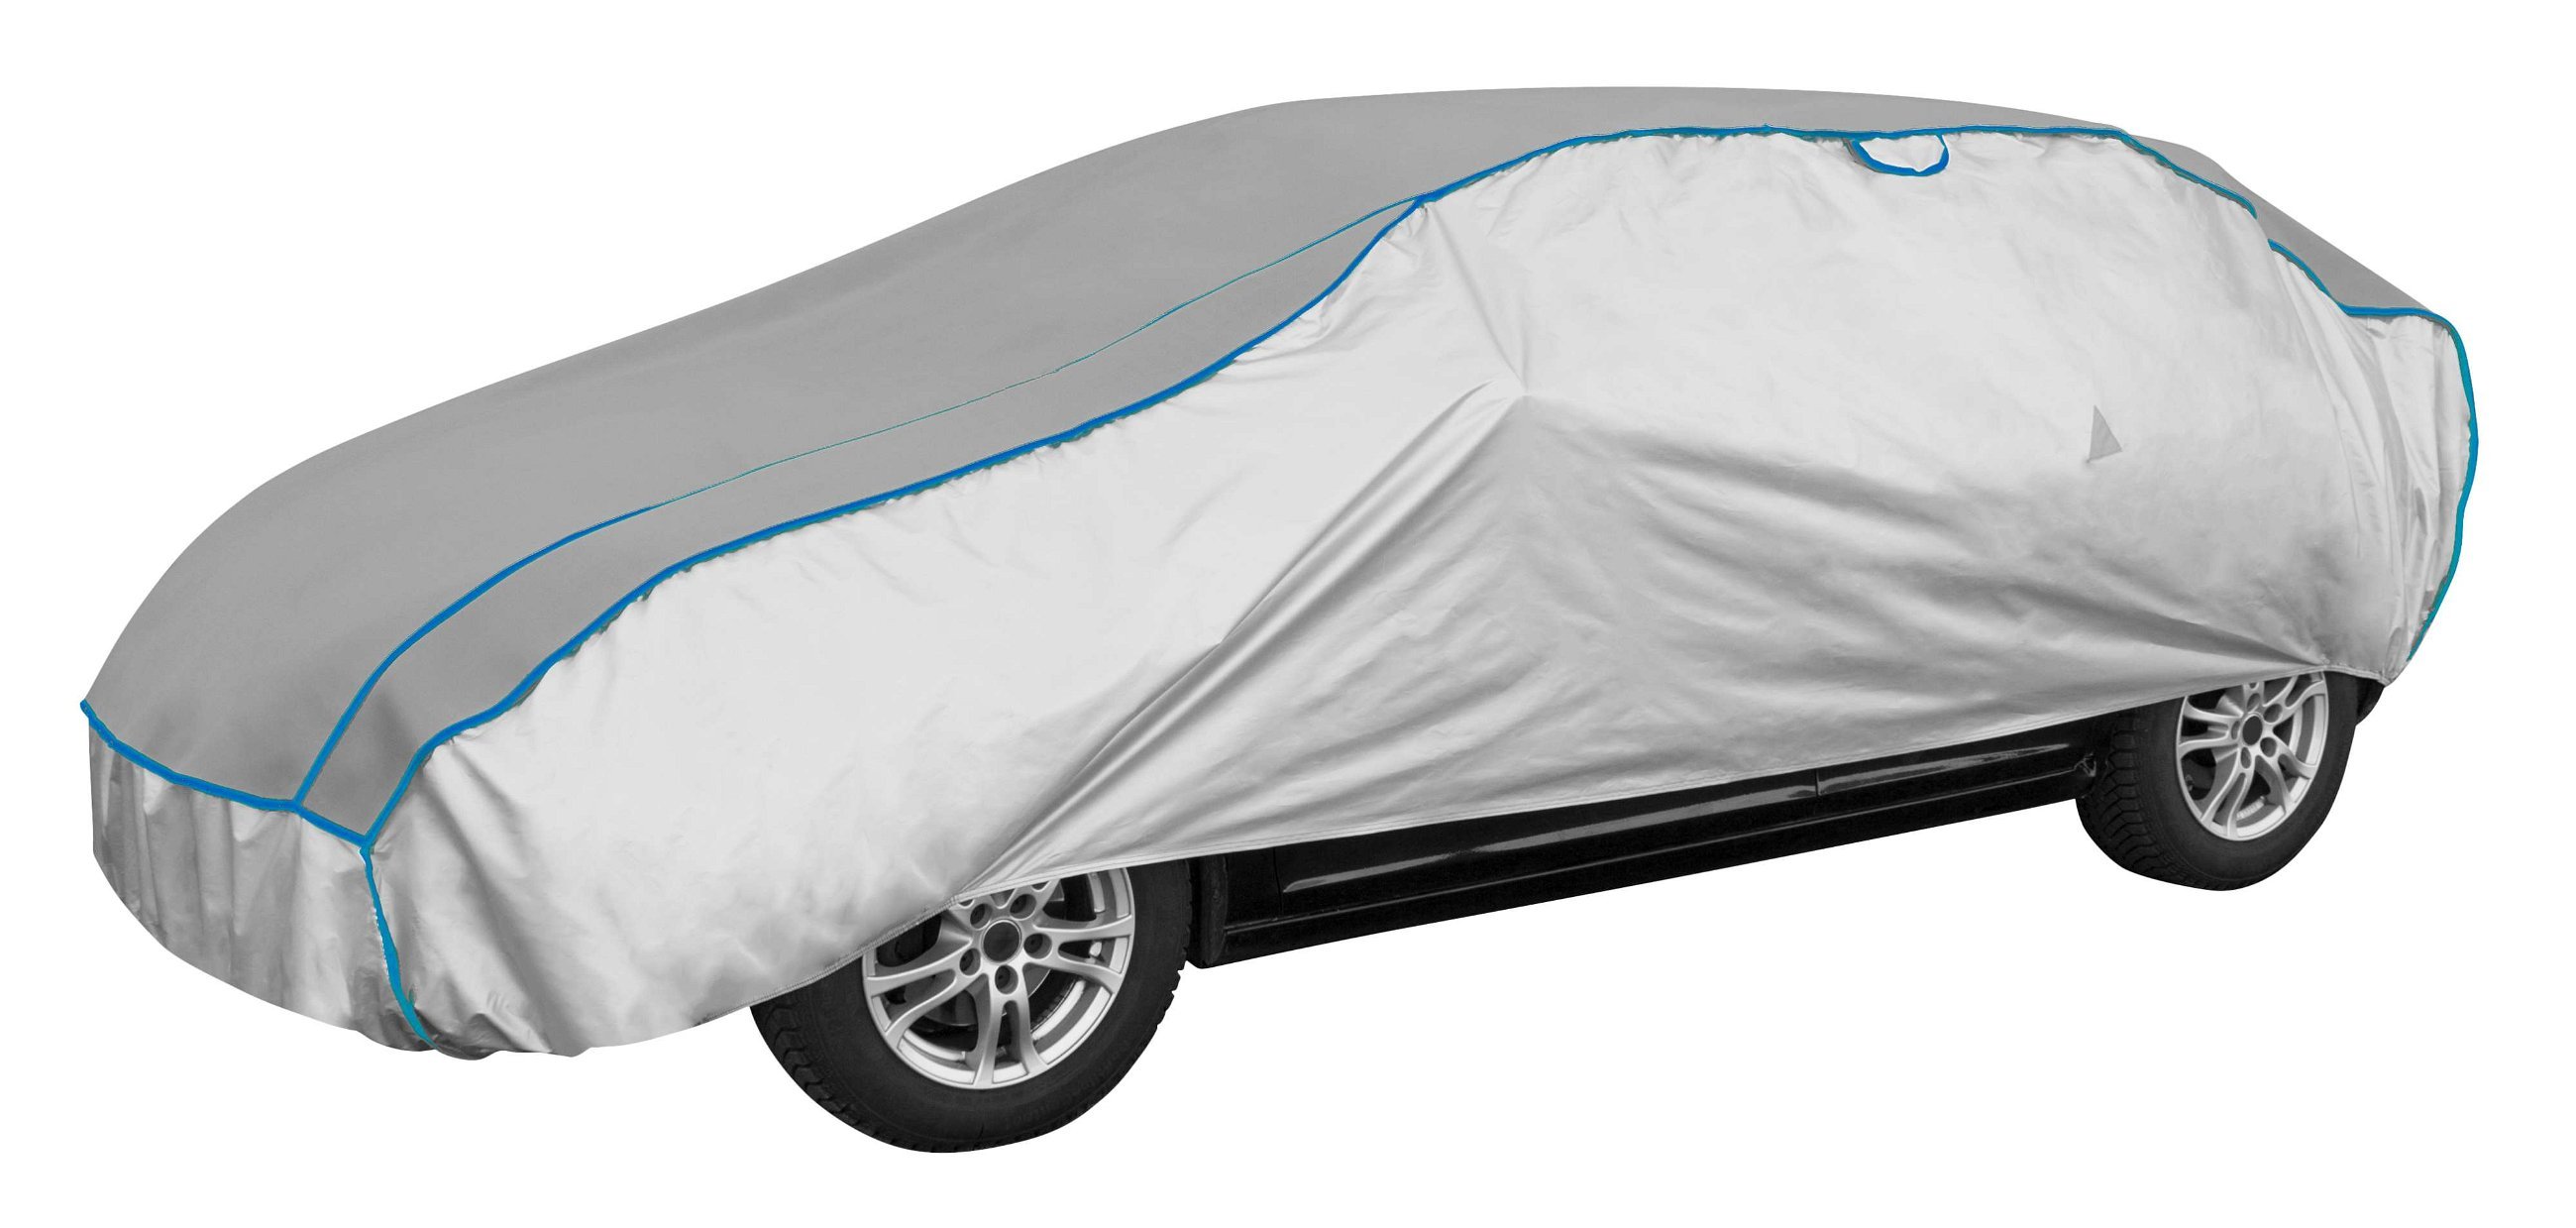 Car hail protection cover Comfort Protect XL 525x175x120cm